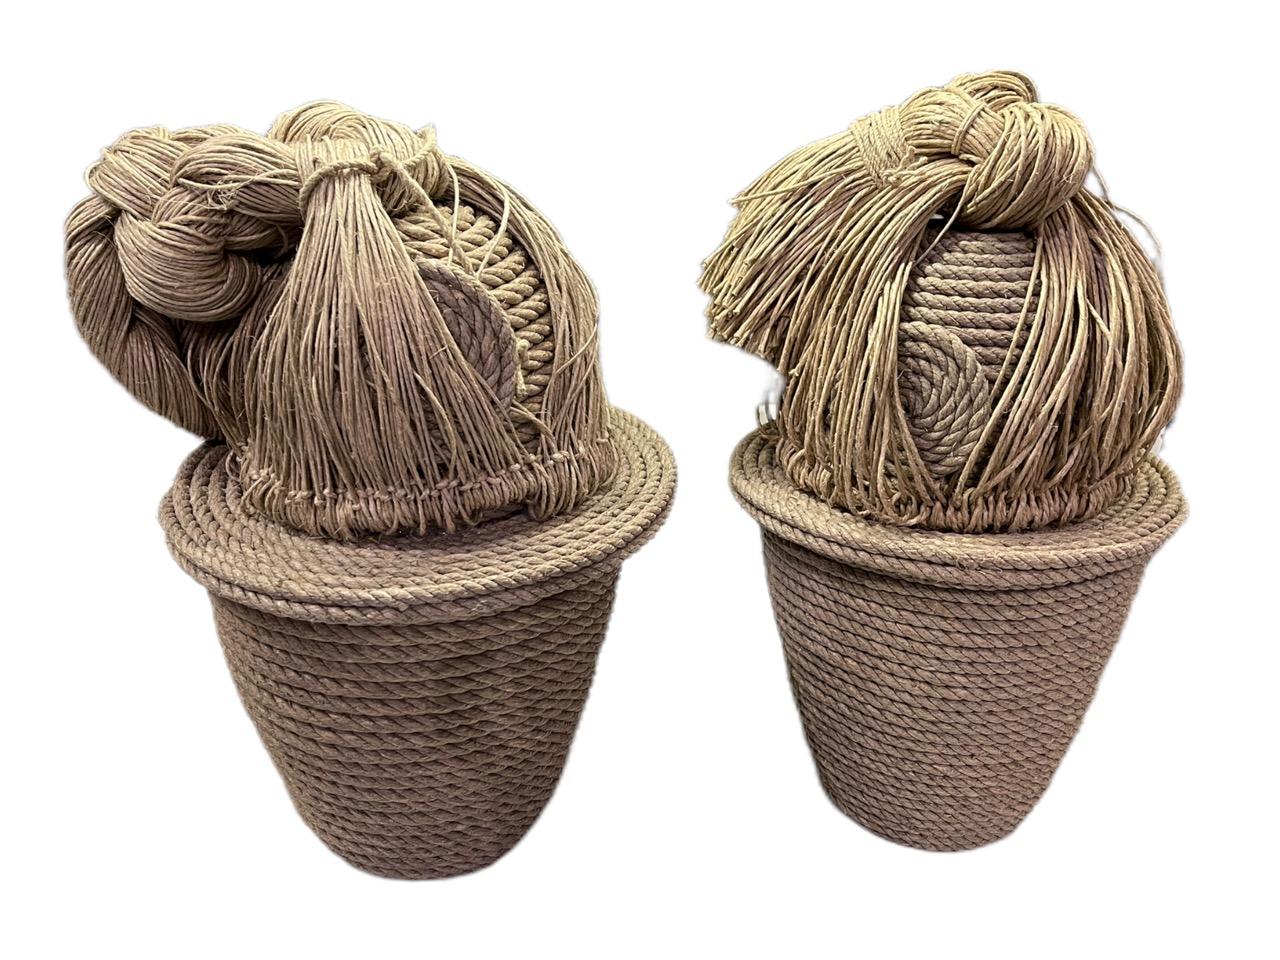 A pair of contemporary 21st Century French Christian Astuguevieille natural jute rope covered urns. These are decorative sculptures which are hand-made.